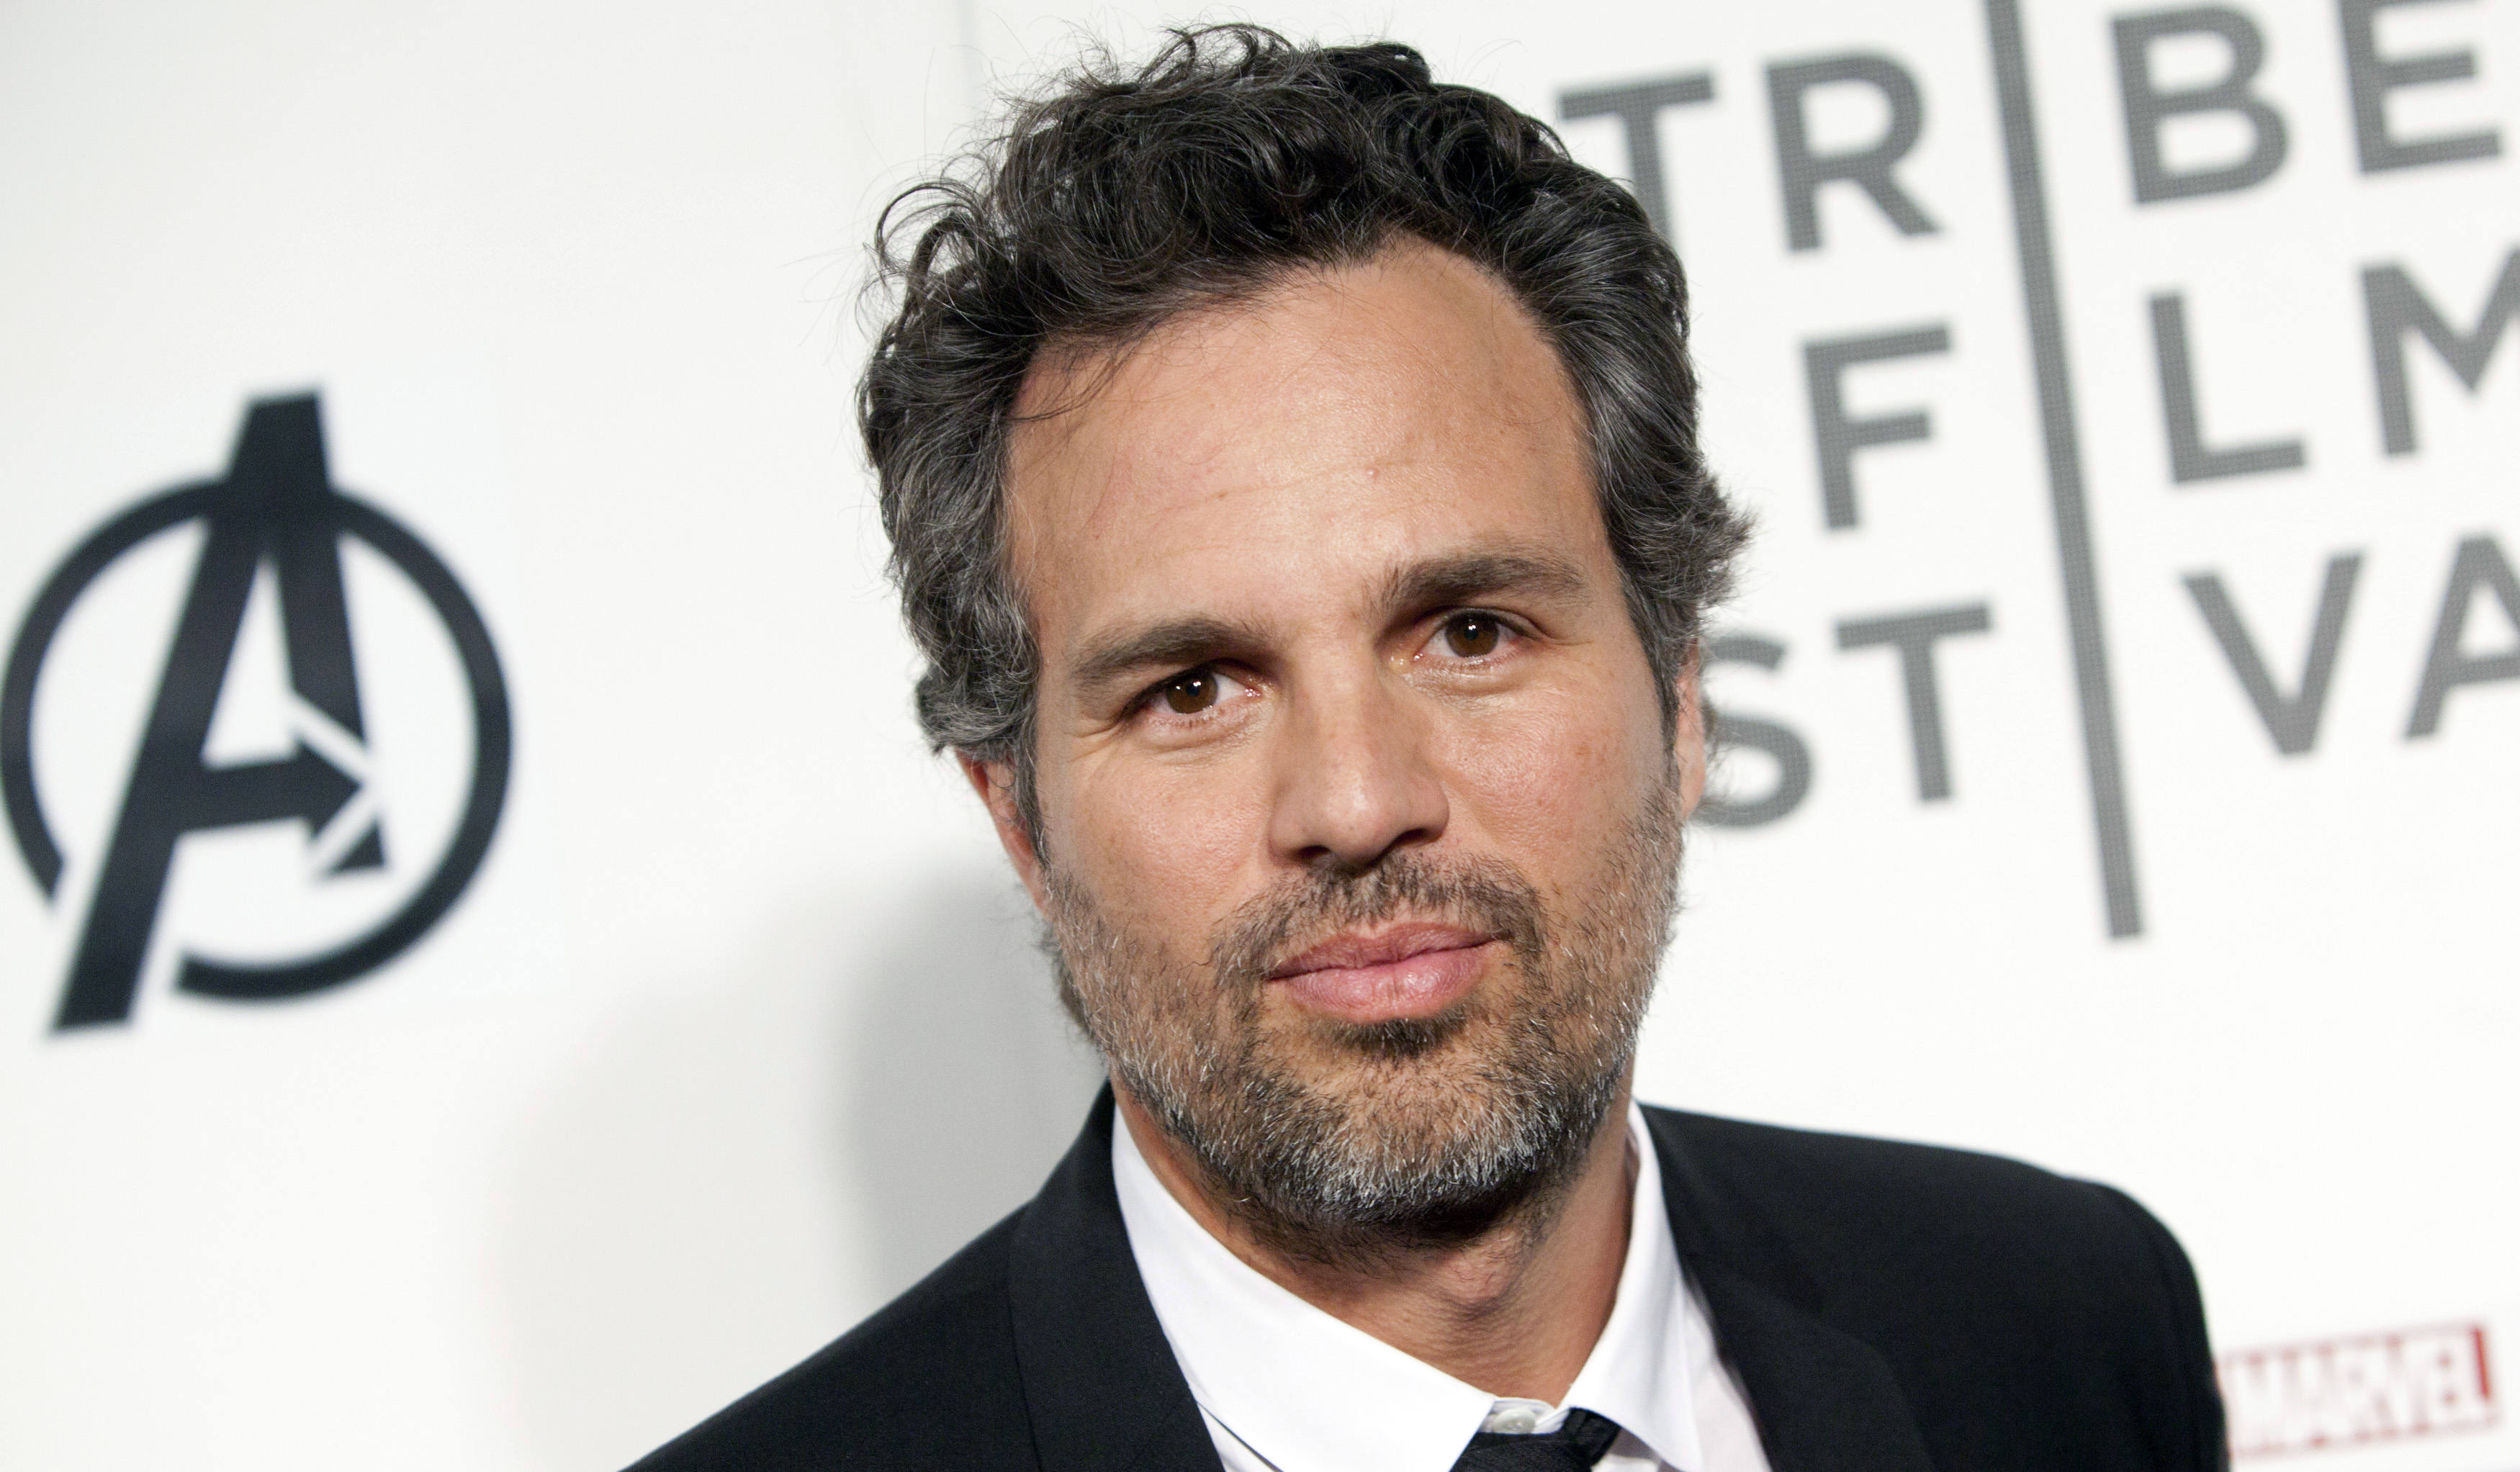 Actor Mark Ruffalo arrives at the screening of the film "Marvel's The Avengers" for the closing night of the 2012 Tribeca Film Festival in New York